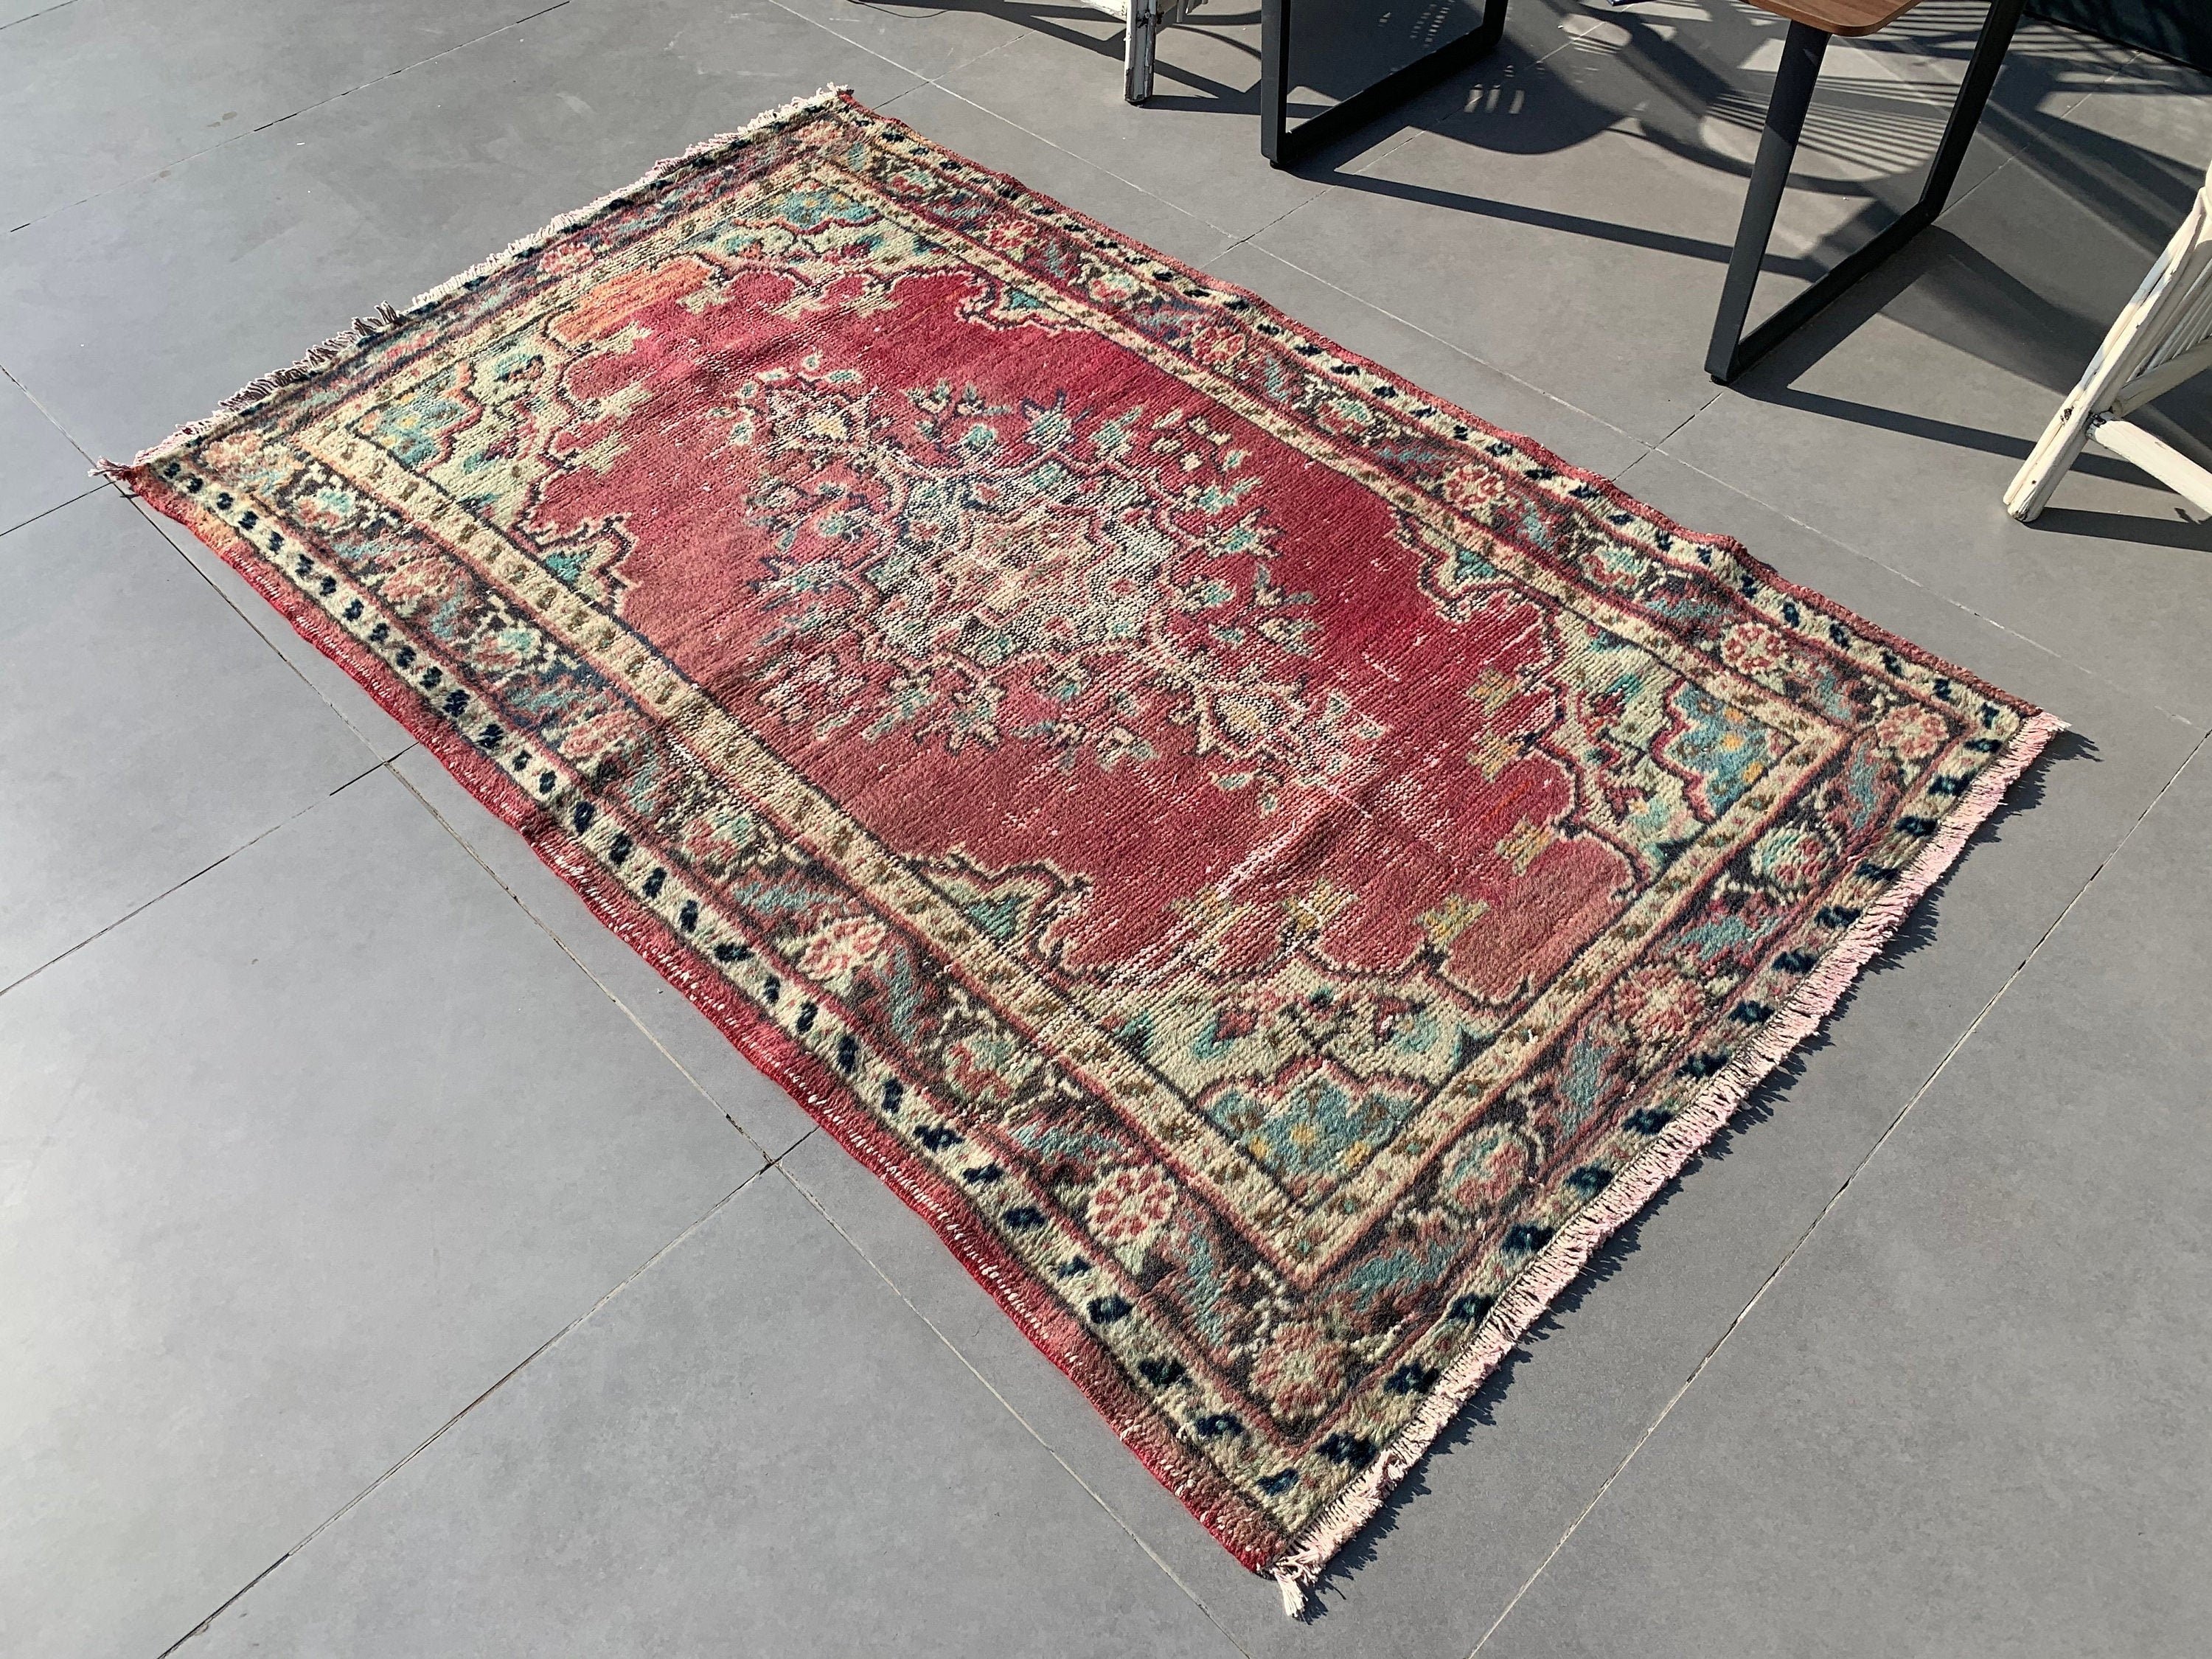 Red Oushak Rug, Entry Rugs, Moroccan Rug, Vintage Rug, Rugs for Entry, Office Rug, Bedroom Rugs, 3.4x5.6 ft Accent Rug, Turkish Rug